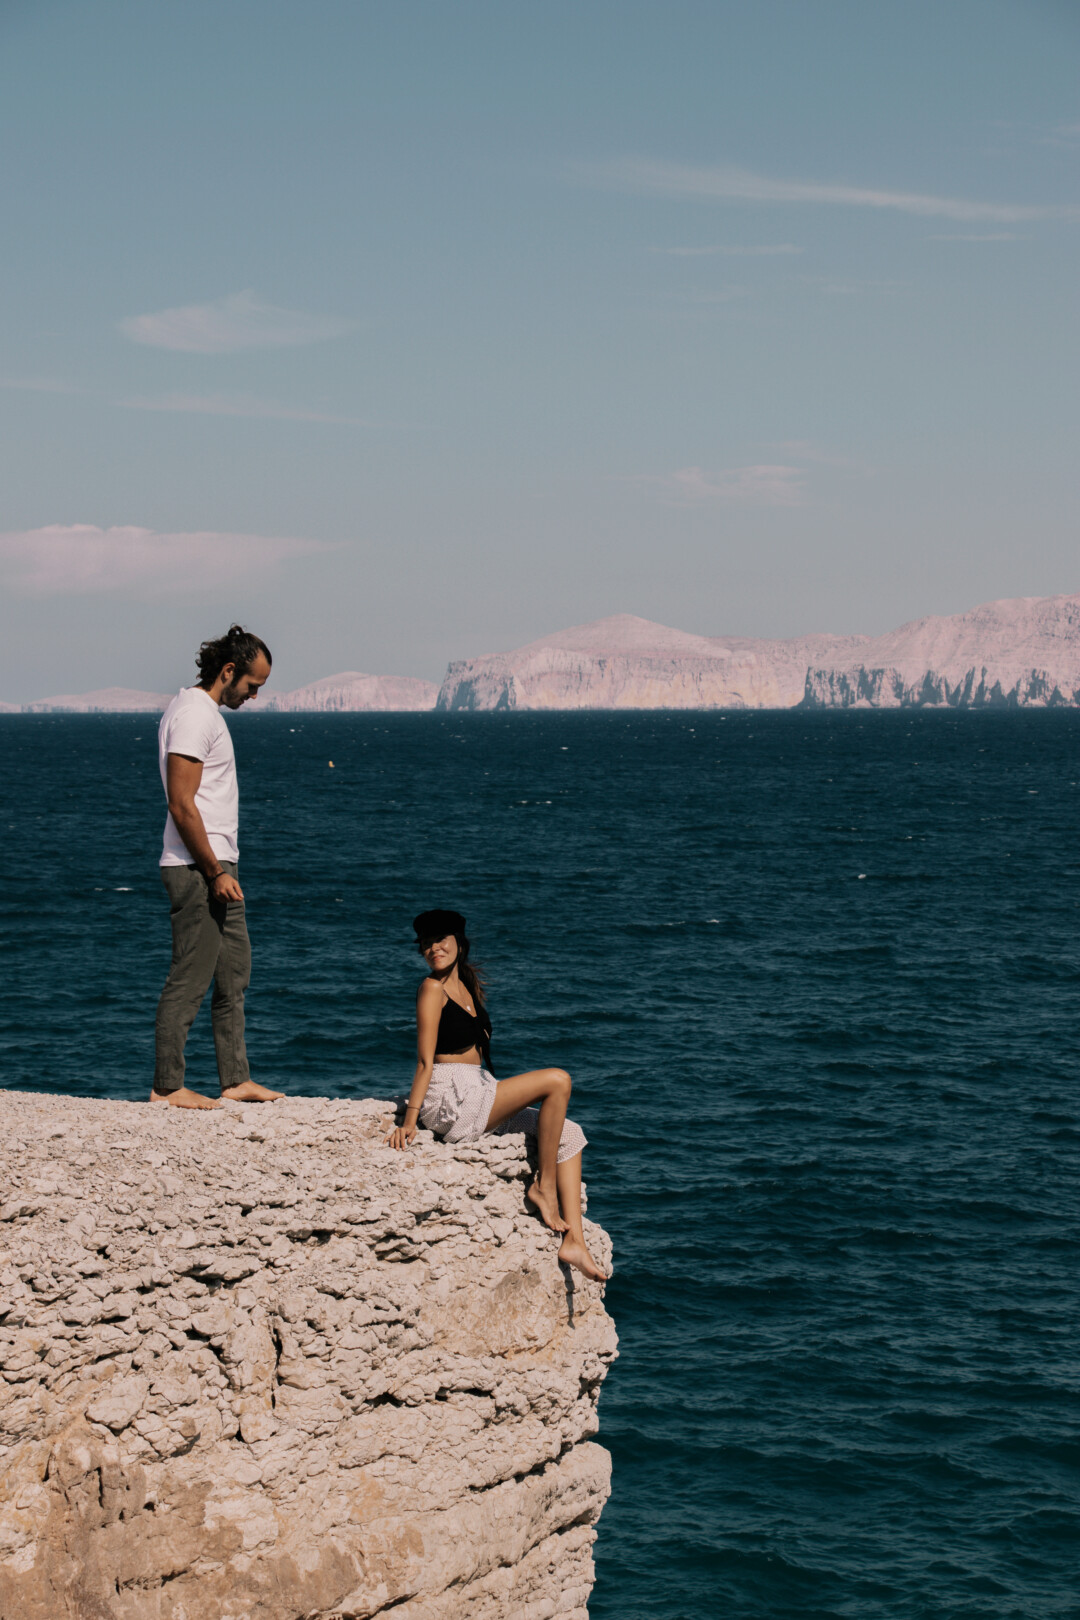 Pili and Dano next to a cliff in Musandam